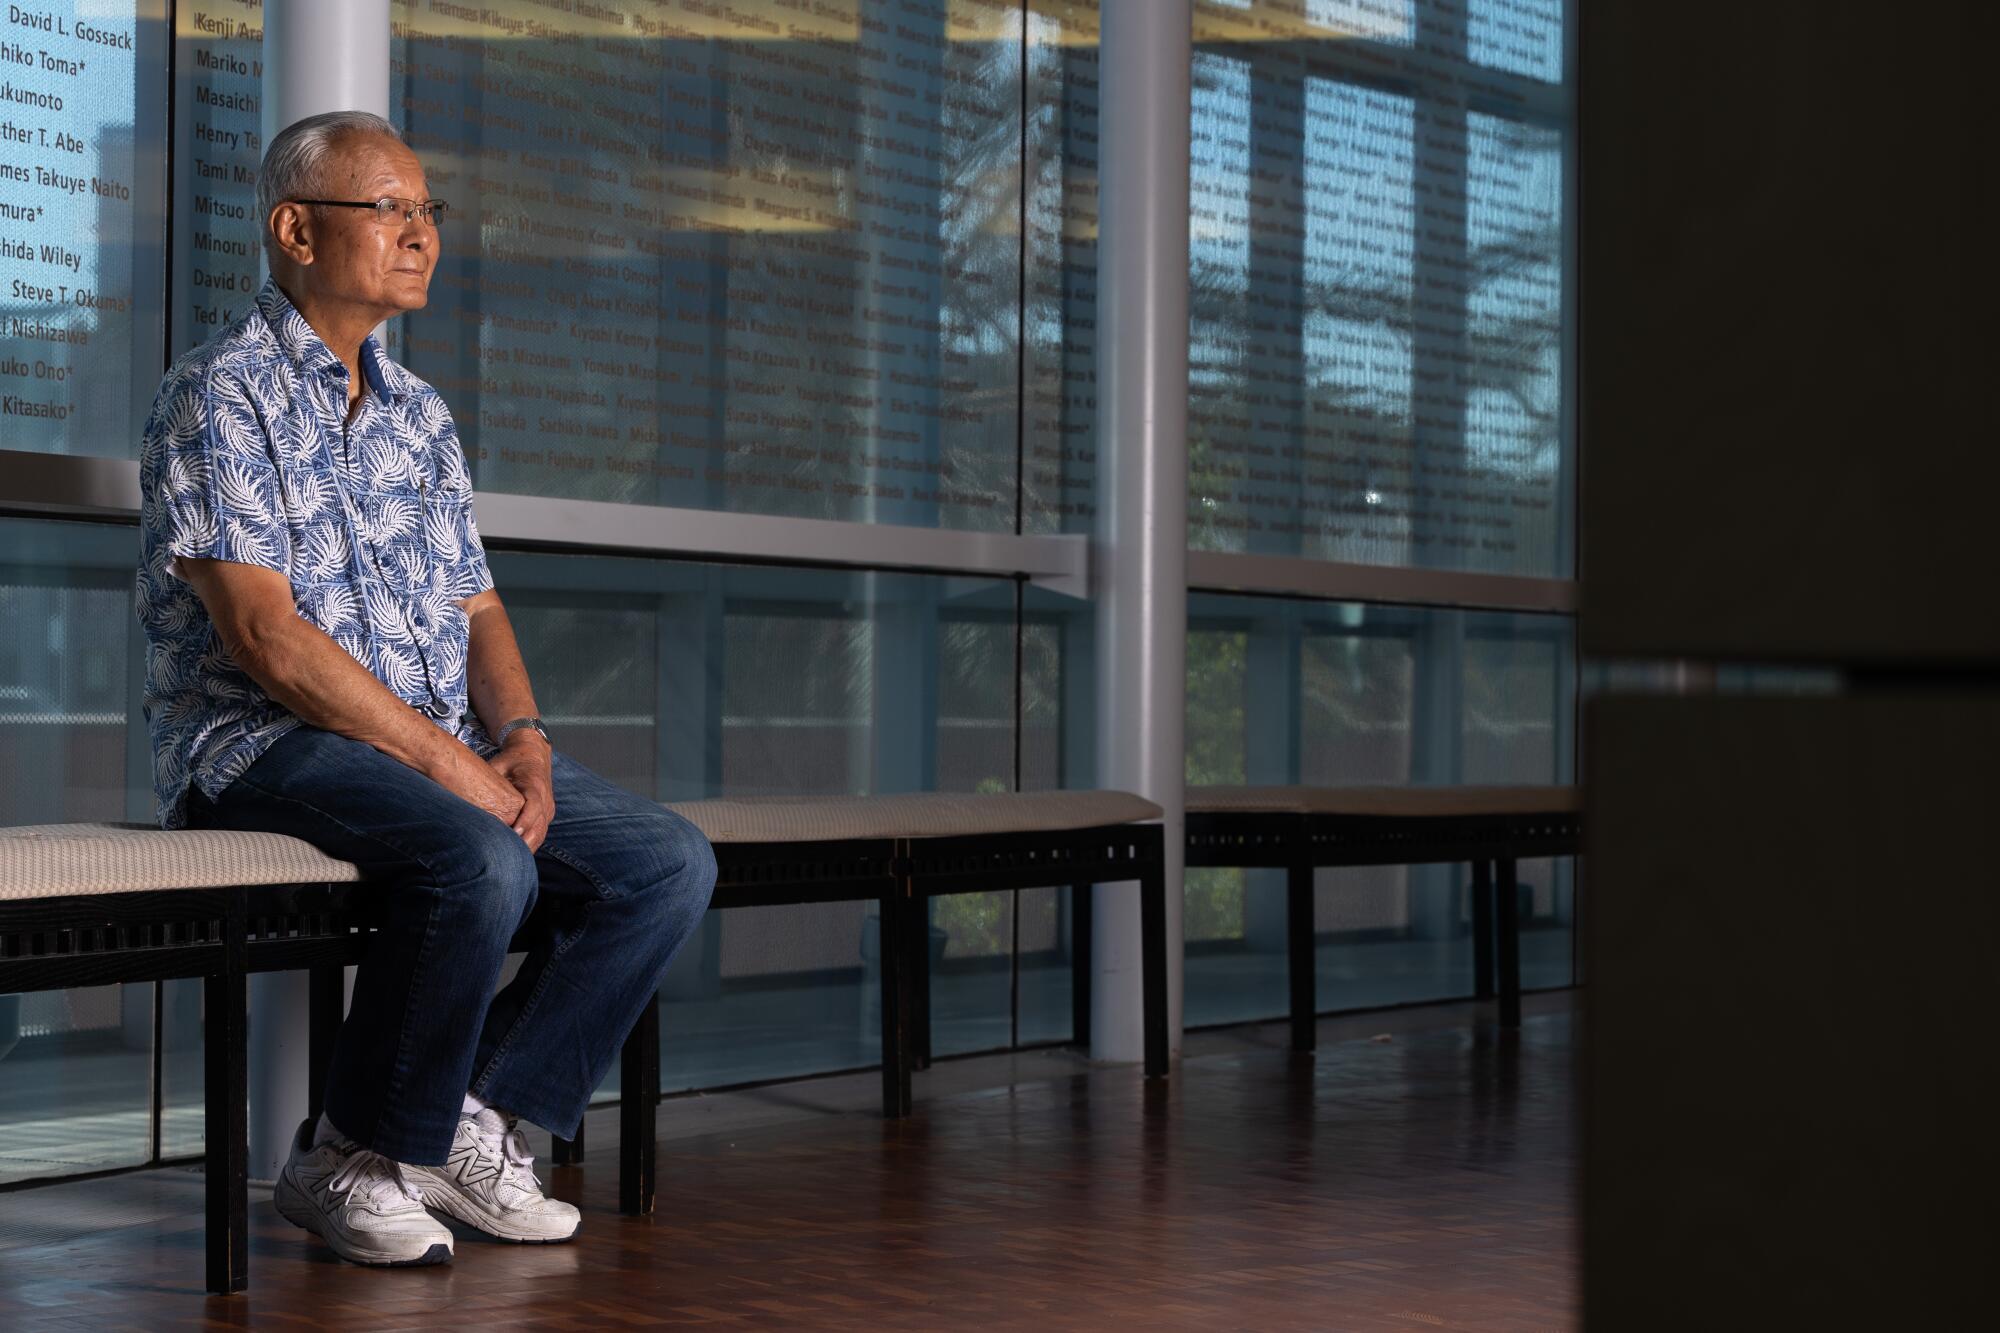 Bill Watanabe sits on a bench in the Japanese American National Museum in Little Tokyo.